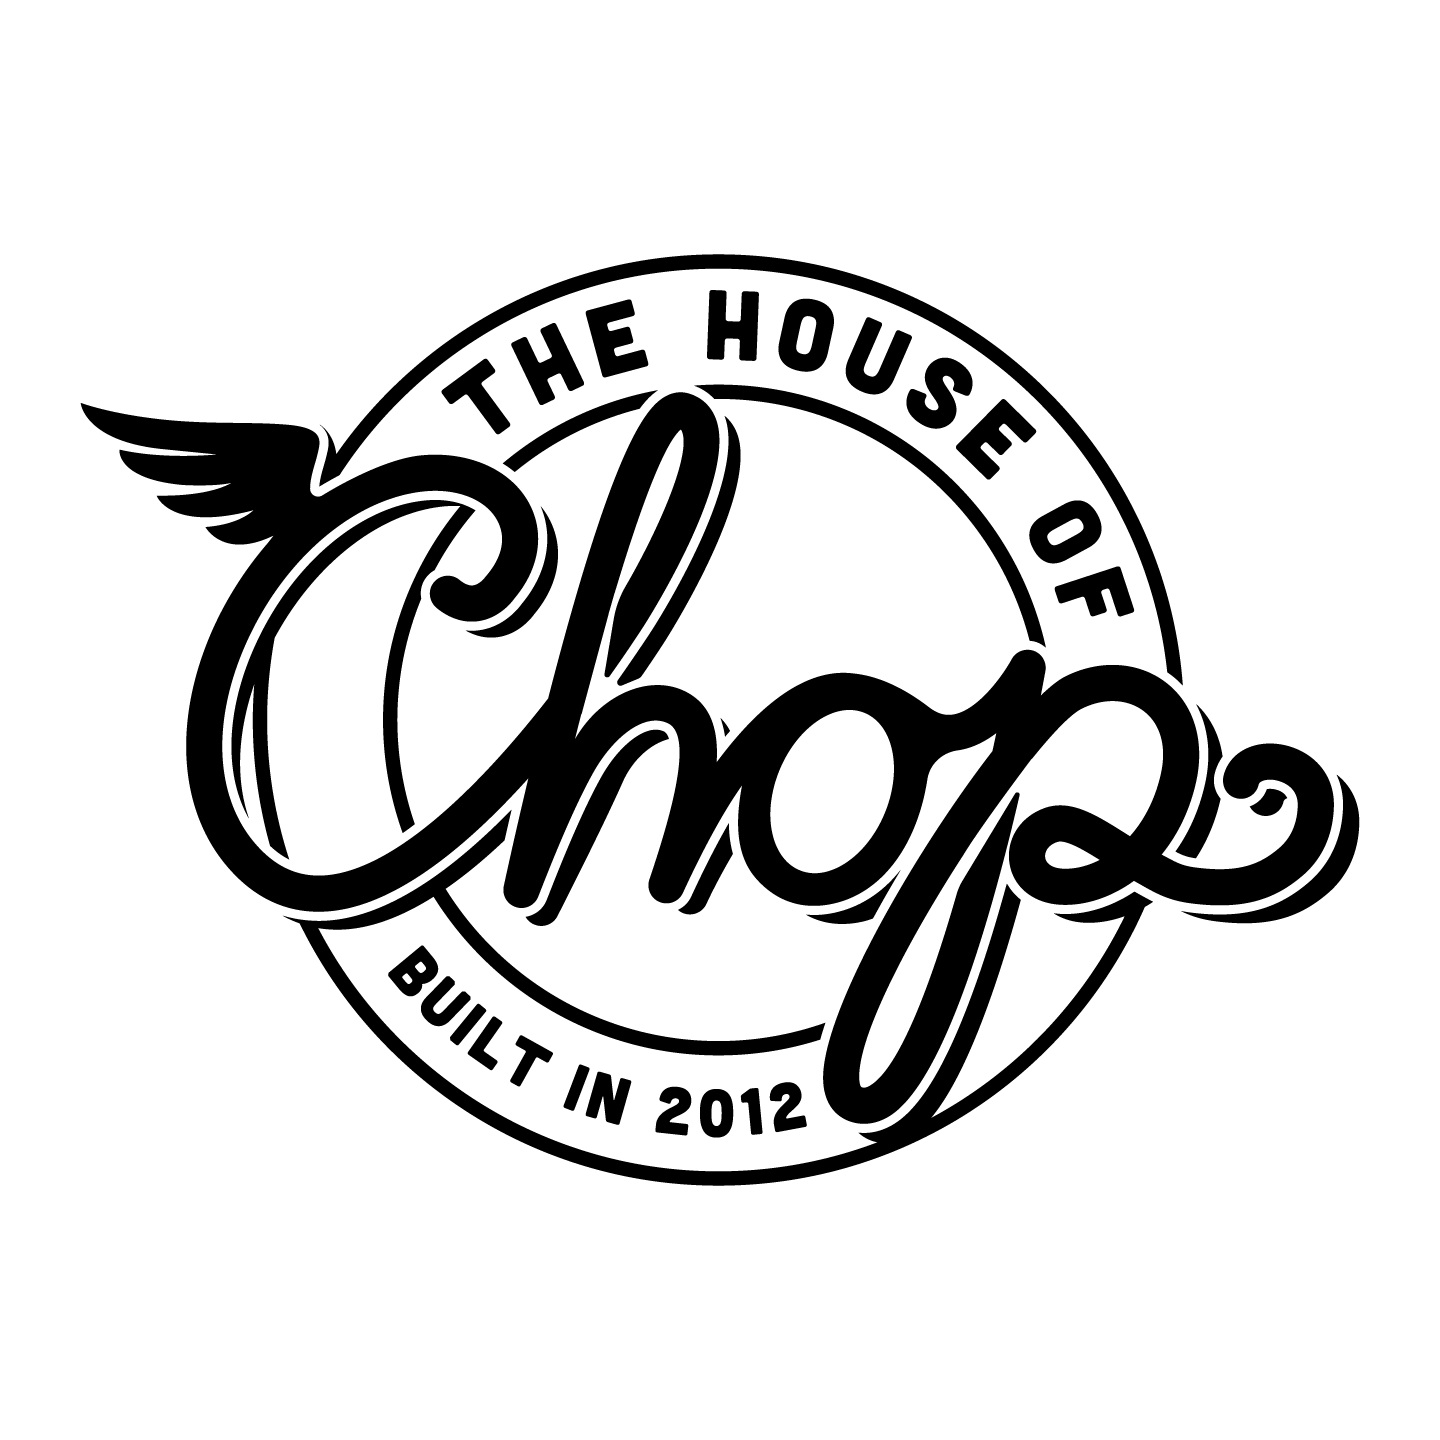 The House of Chop